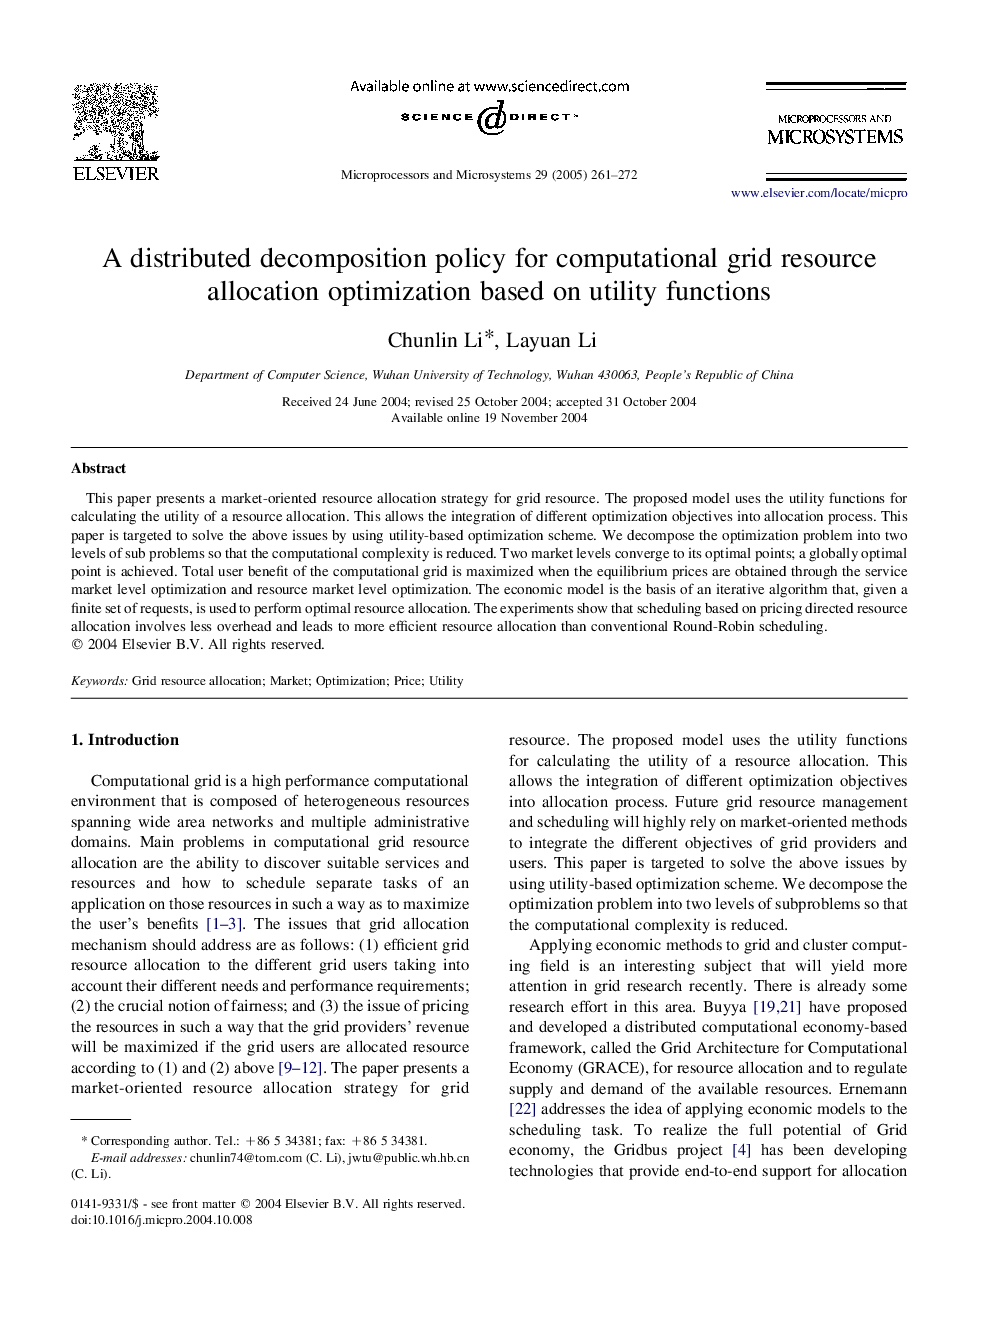 A distributed decomposition policy for computational grid resource allocation optimization based on utility functions